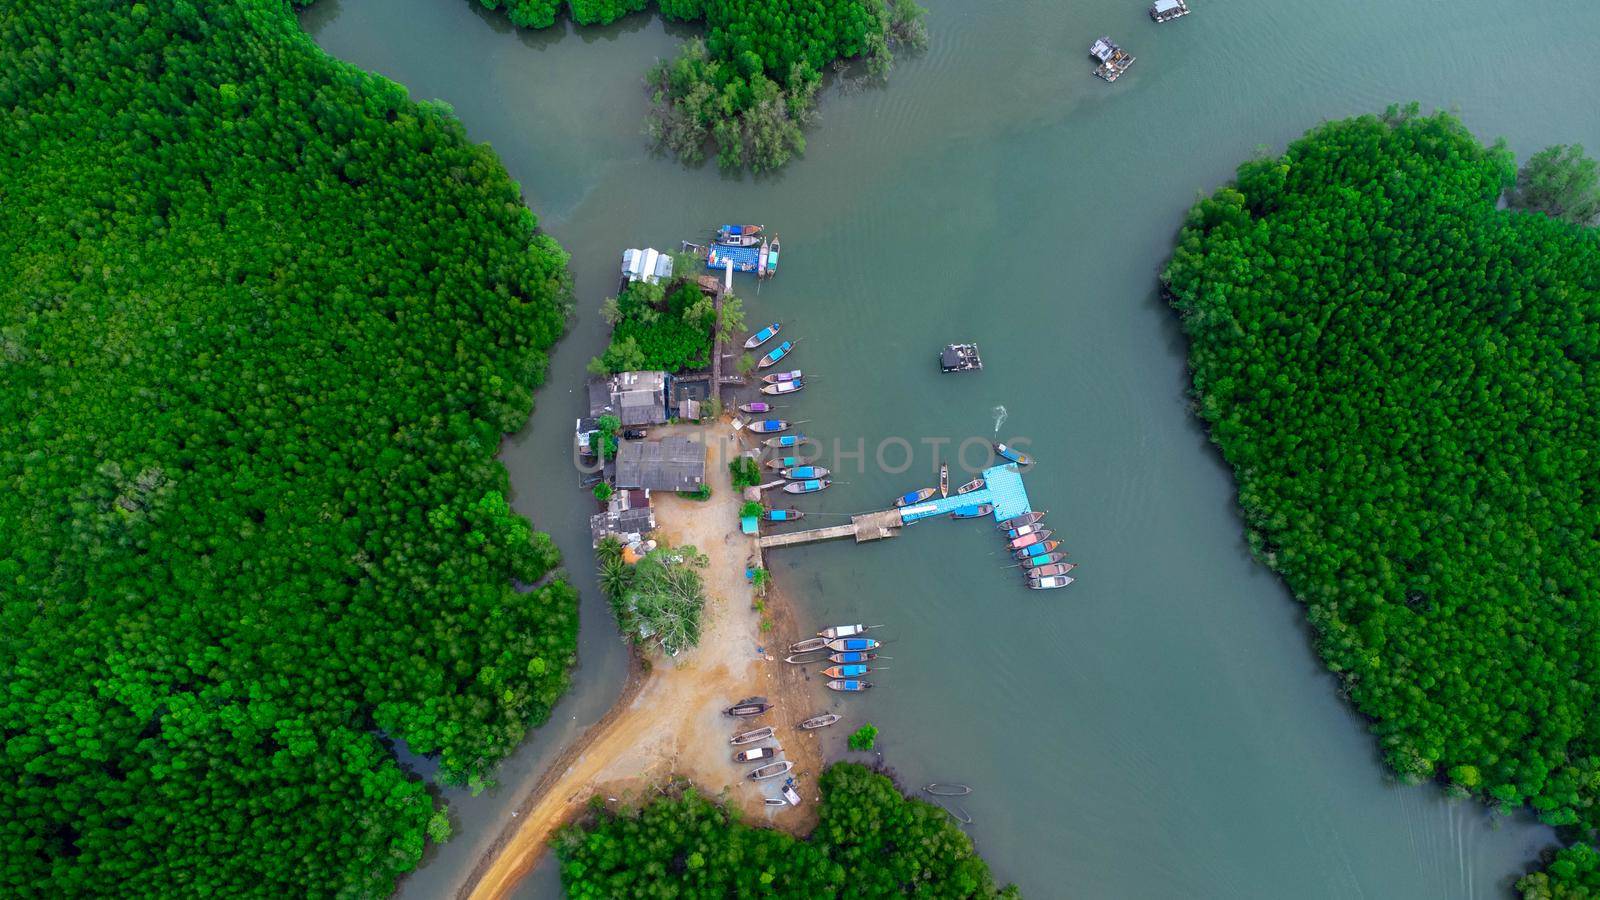 Aerial view of Thai traditional longtail fishing boats at the pier in Phang Nga Bay in the Andaman Sea, Thailand. Top view of many fishing boats floating in the sea among mangrove forest. by TEERASAK